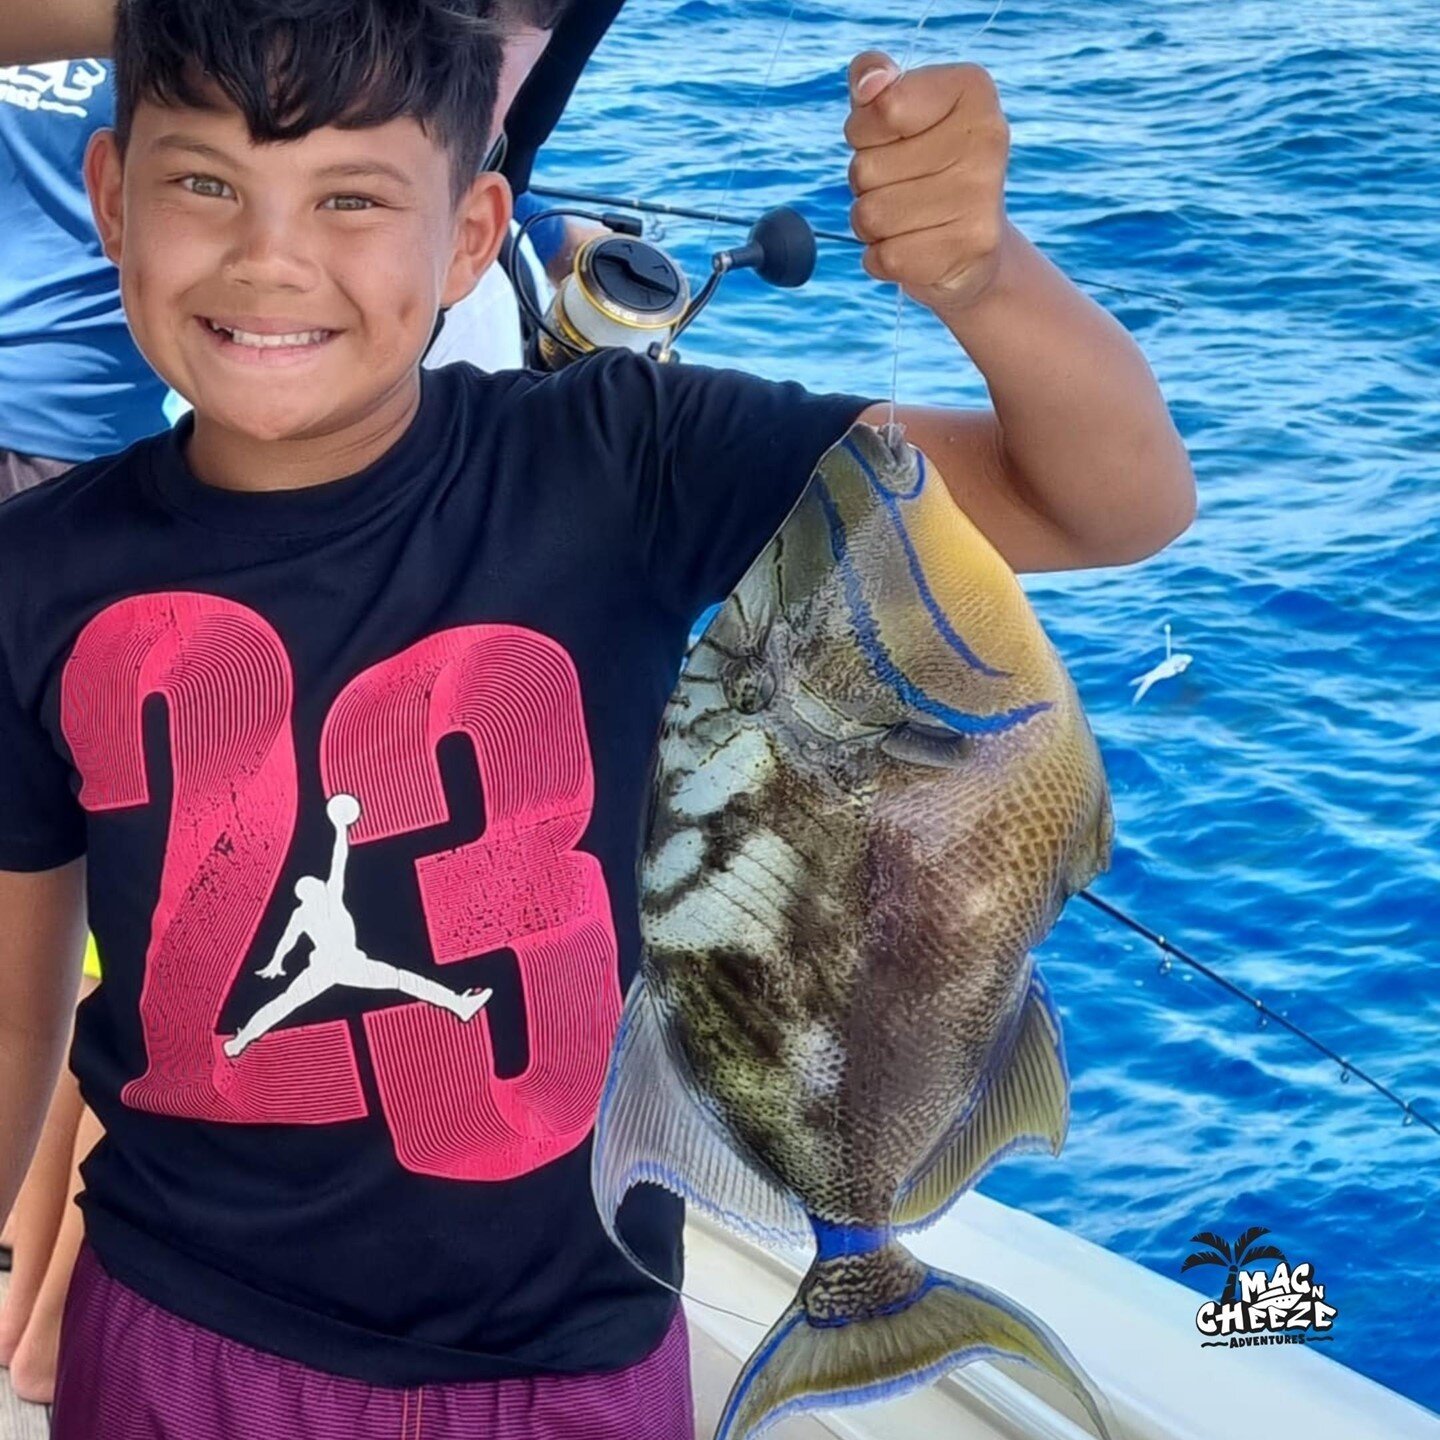 Our adventures are fun guaranteed for the entire family 🎣🤿🏖️🌊🐬🌴 ⁠
⁠
Our aim is to fulfill your exploration needs! ⠀⠀⠀⠀⠀⠀⠀⠀⁠
⠀⠀⠀⠀⠀⠀⠀⠀⠀⁠
𝕎𝕖 𝕠𝕗𝕗𝕖𝕣 𝕗𝕚𝕤𝕙𝕚𝕟𝕘, 𝕤𝕟𝕠𝕣𝕜𝕖𝕝𝕚𝕟𝕘, 𝕓𝕖𝕒𝕔𝕙, 𝕒𝕟𝕕 𝕤𝕦𝕟𝕤𝕖𝕥 𝕔𝕣𝕦𝕚𝕤𝕖𝕤.⠀⠀⠀⠀⠀⠀⠀⠀